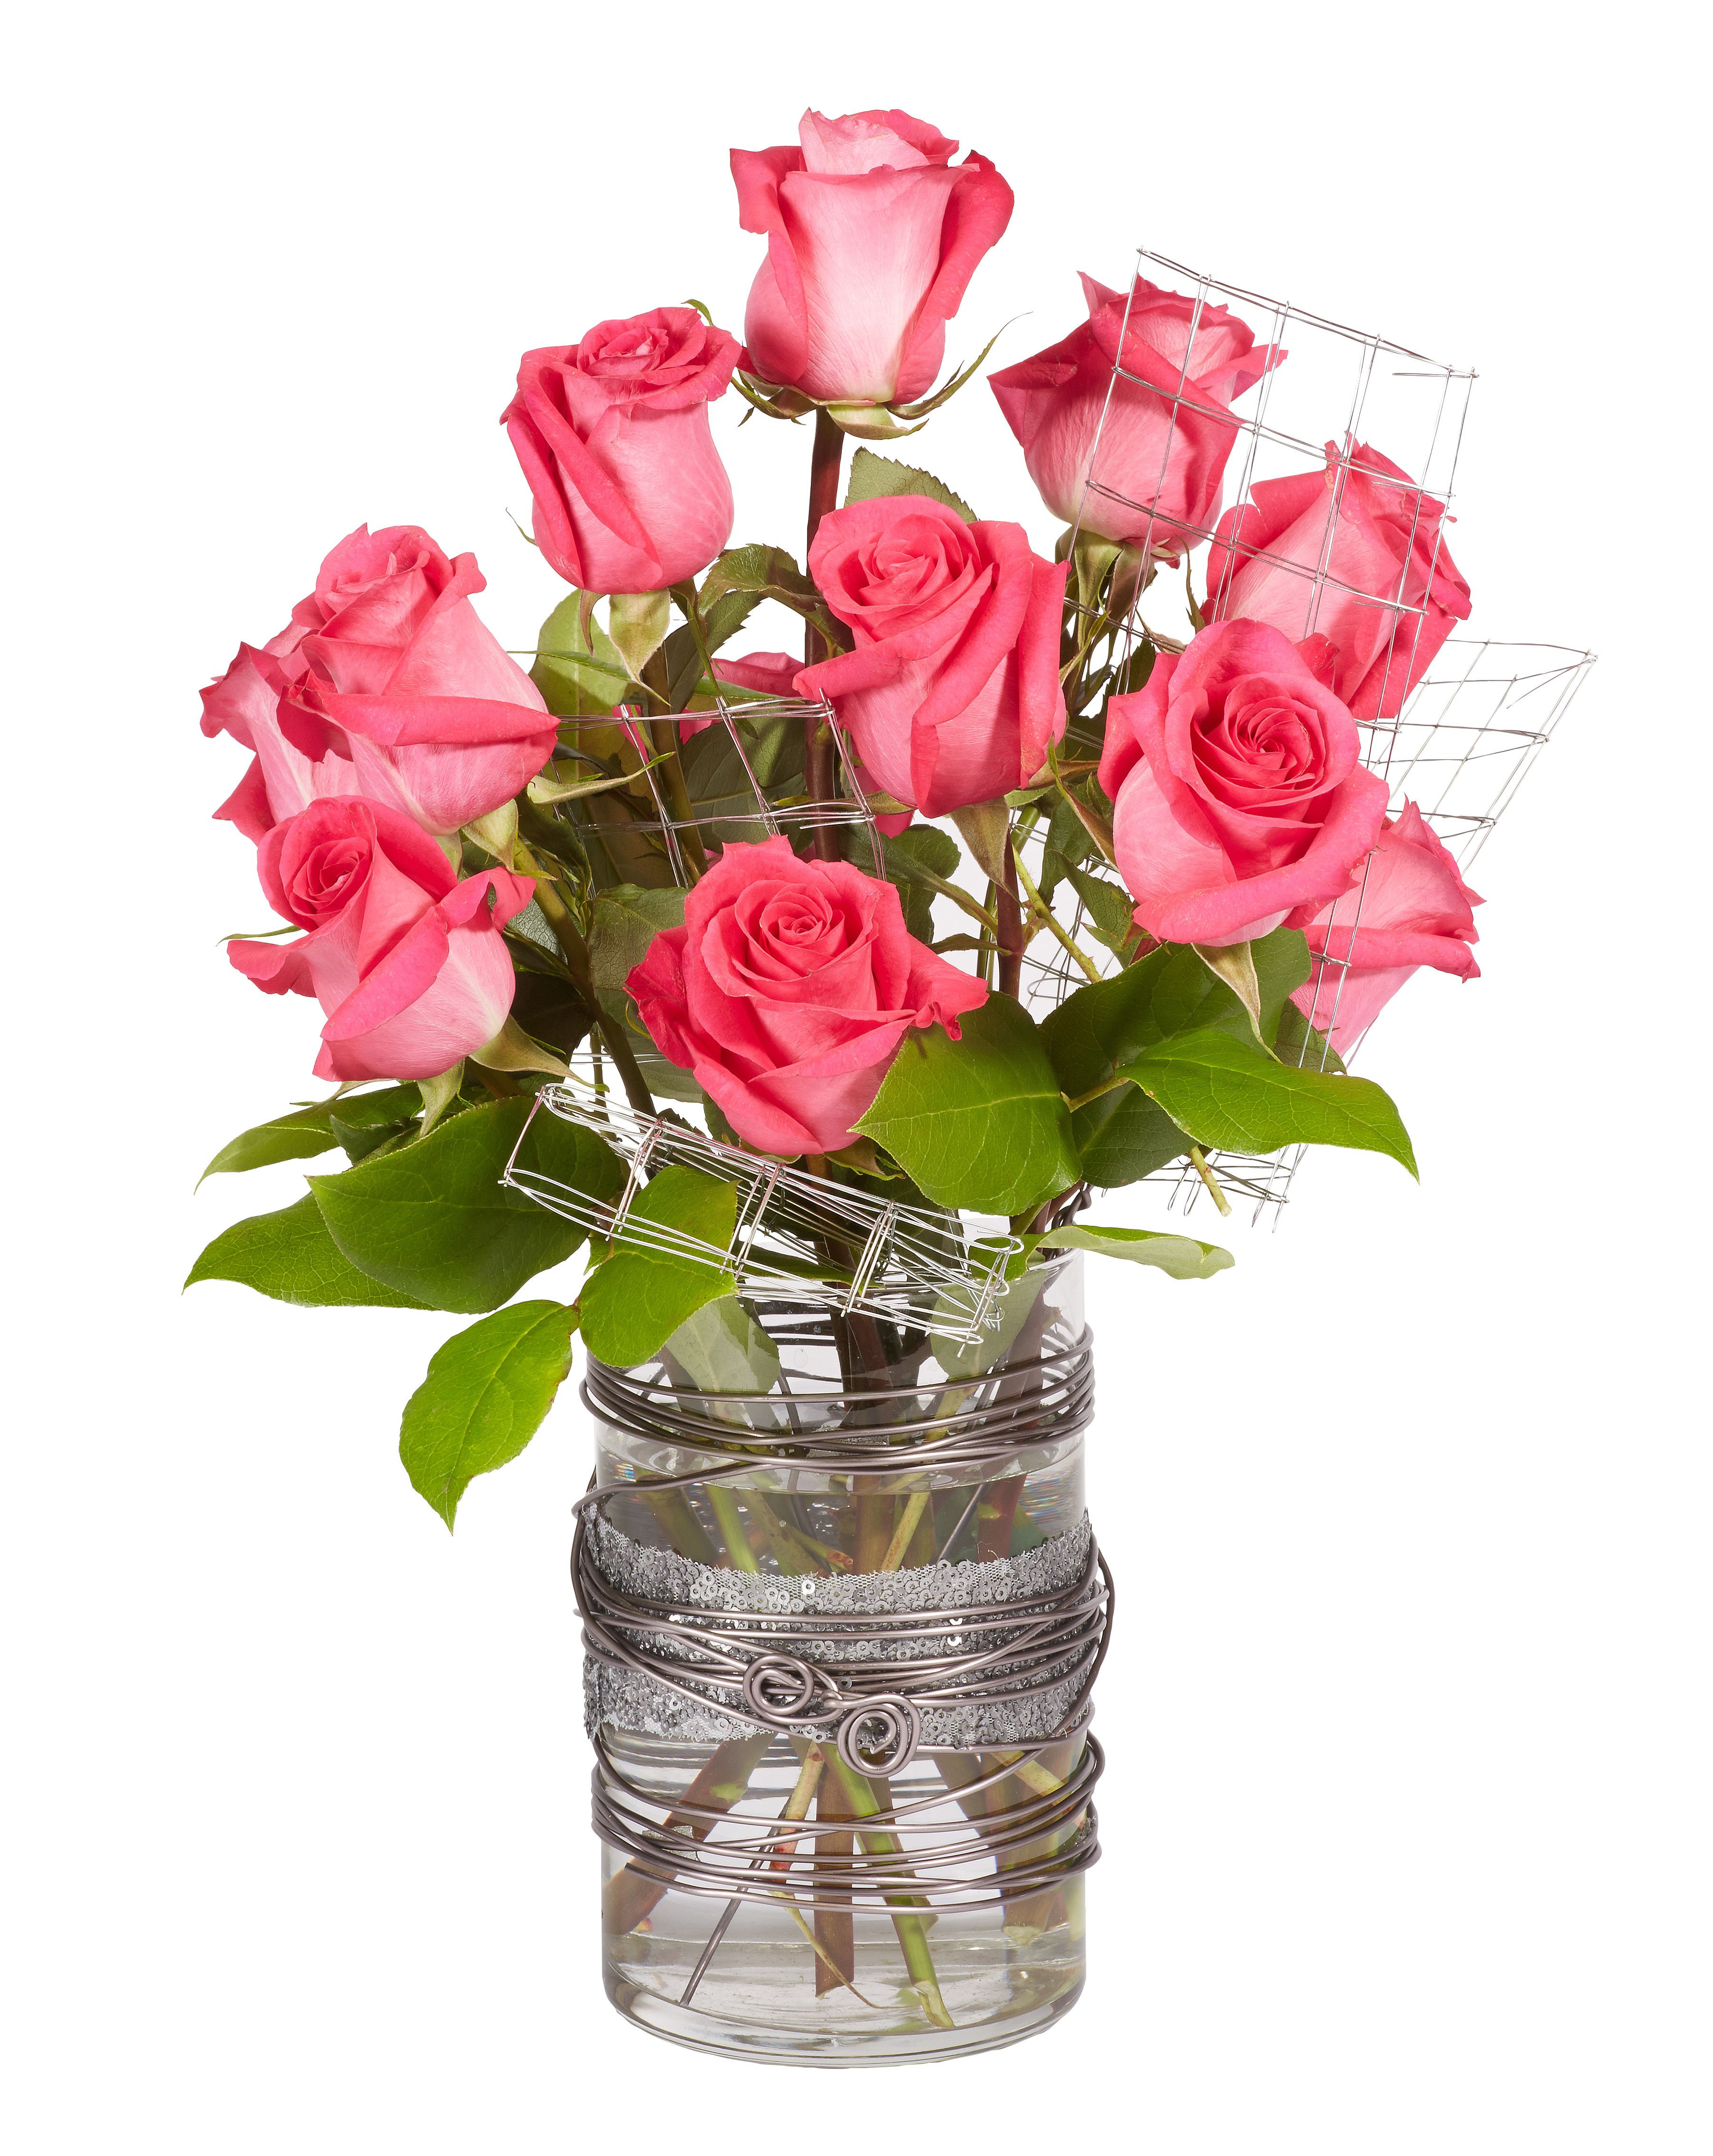 14 Lovable Hot Pink Vase 2024 free download hot pink vase of hot pink flowers and steel accent pieces create this stunning floral intended for hot pink flowers and steel accent pieces create this stunning floral arrangement